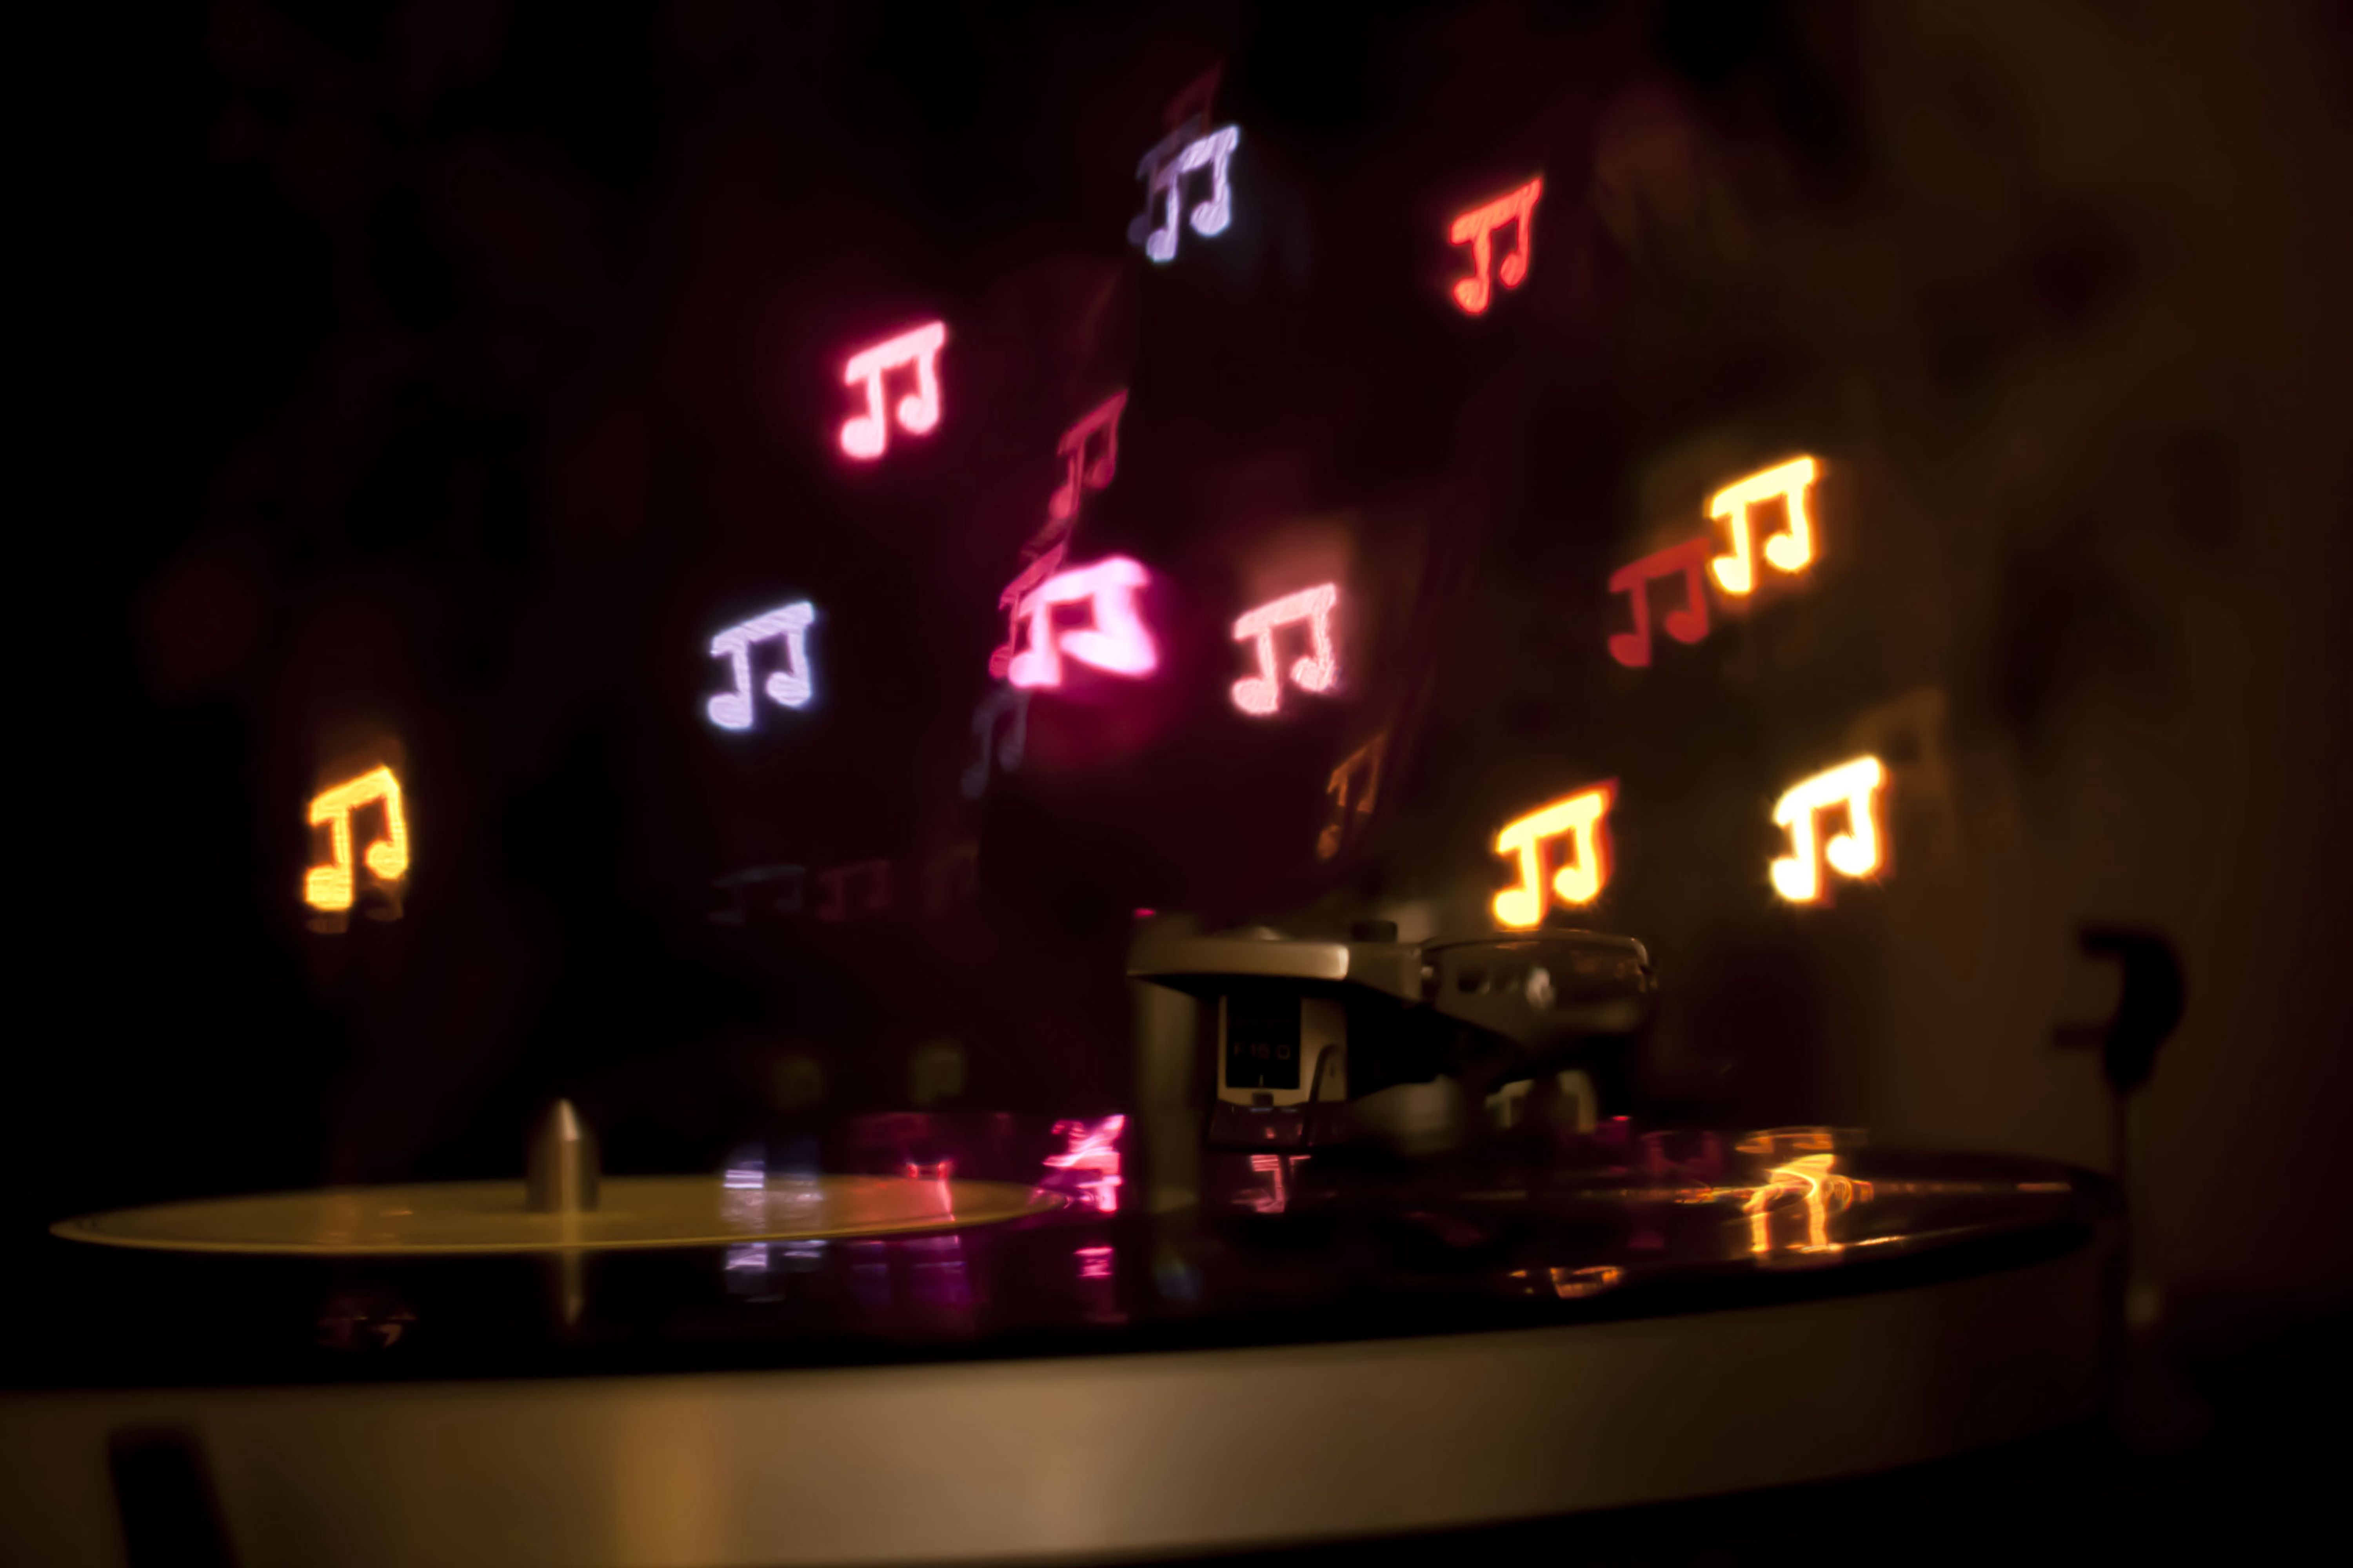 Horizontal Wallpaper music, notes, needle, lights, glow, plate, vinyl, turntable, record player